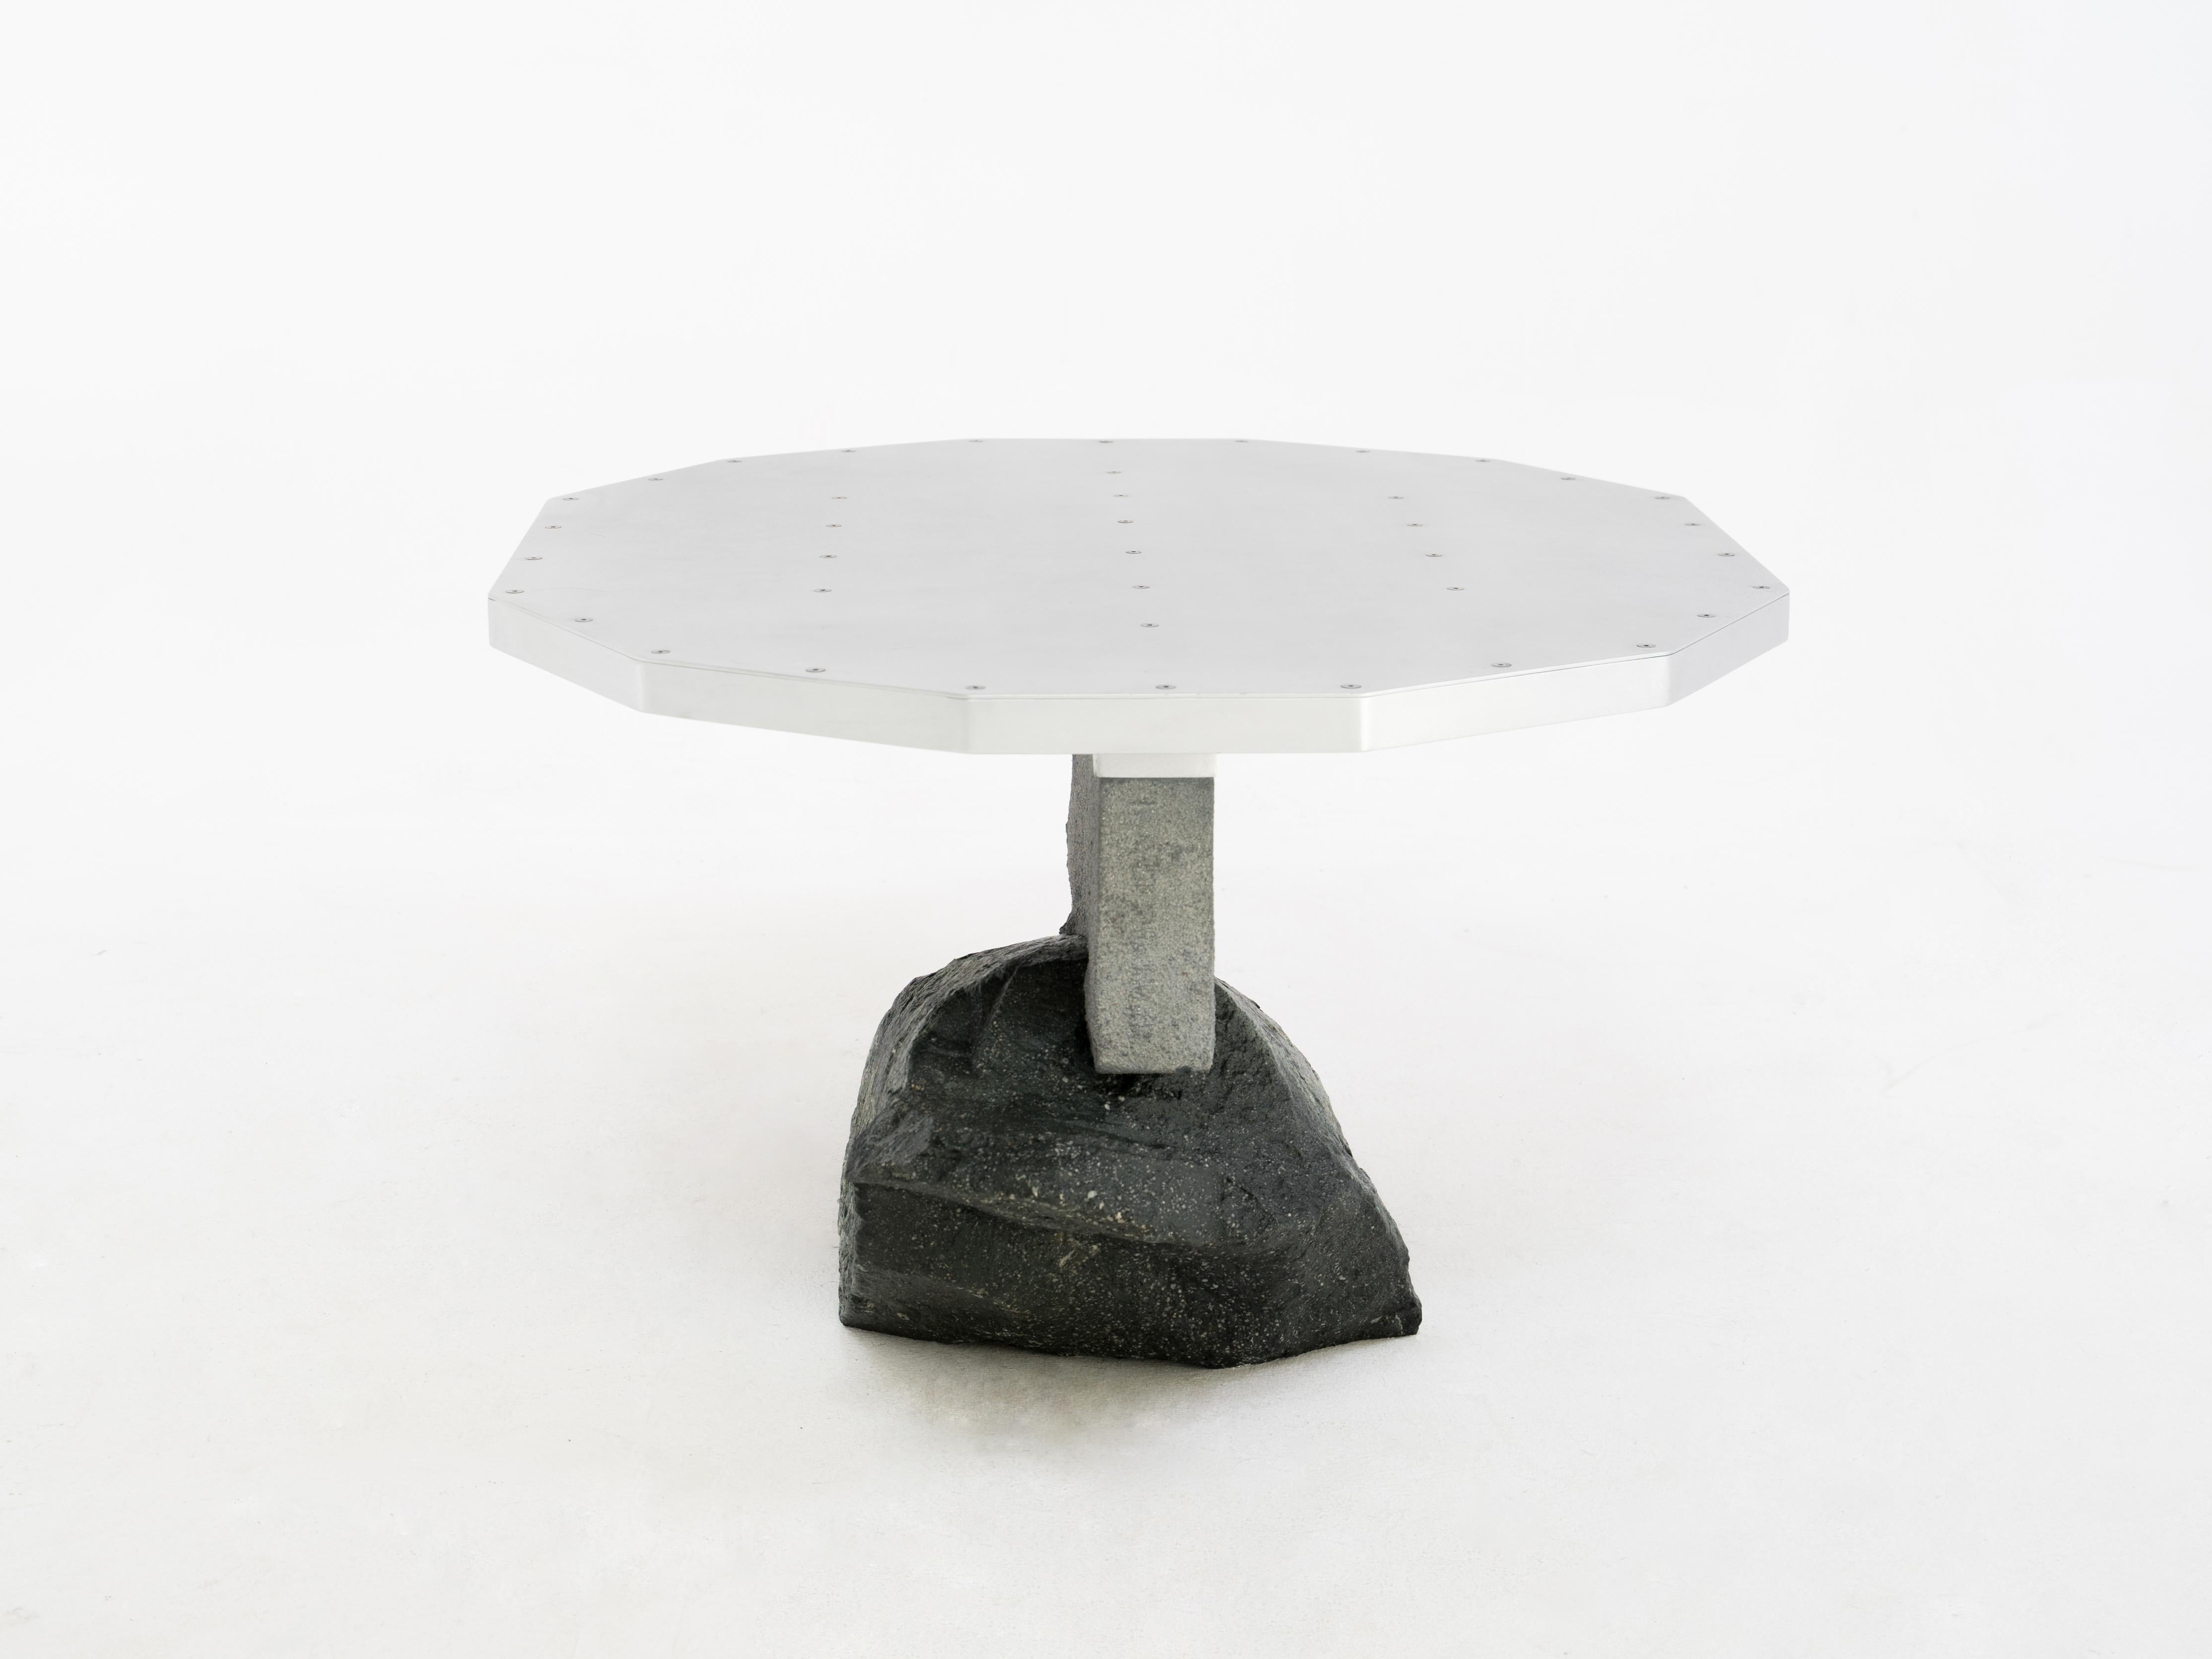 Hand-Crafted Coffee table, Foreign Bodies LP-35C, aluminium, stone, by Collin Velkoff For Sale